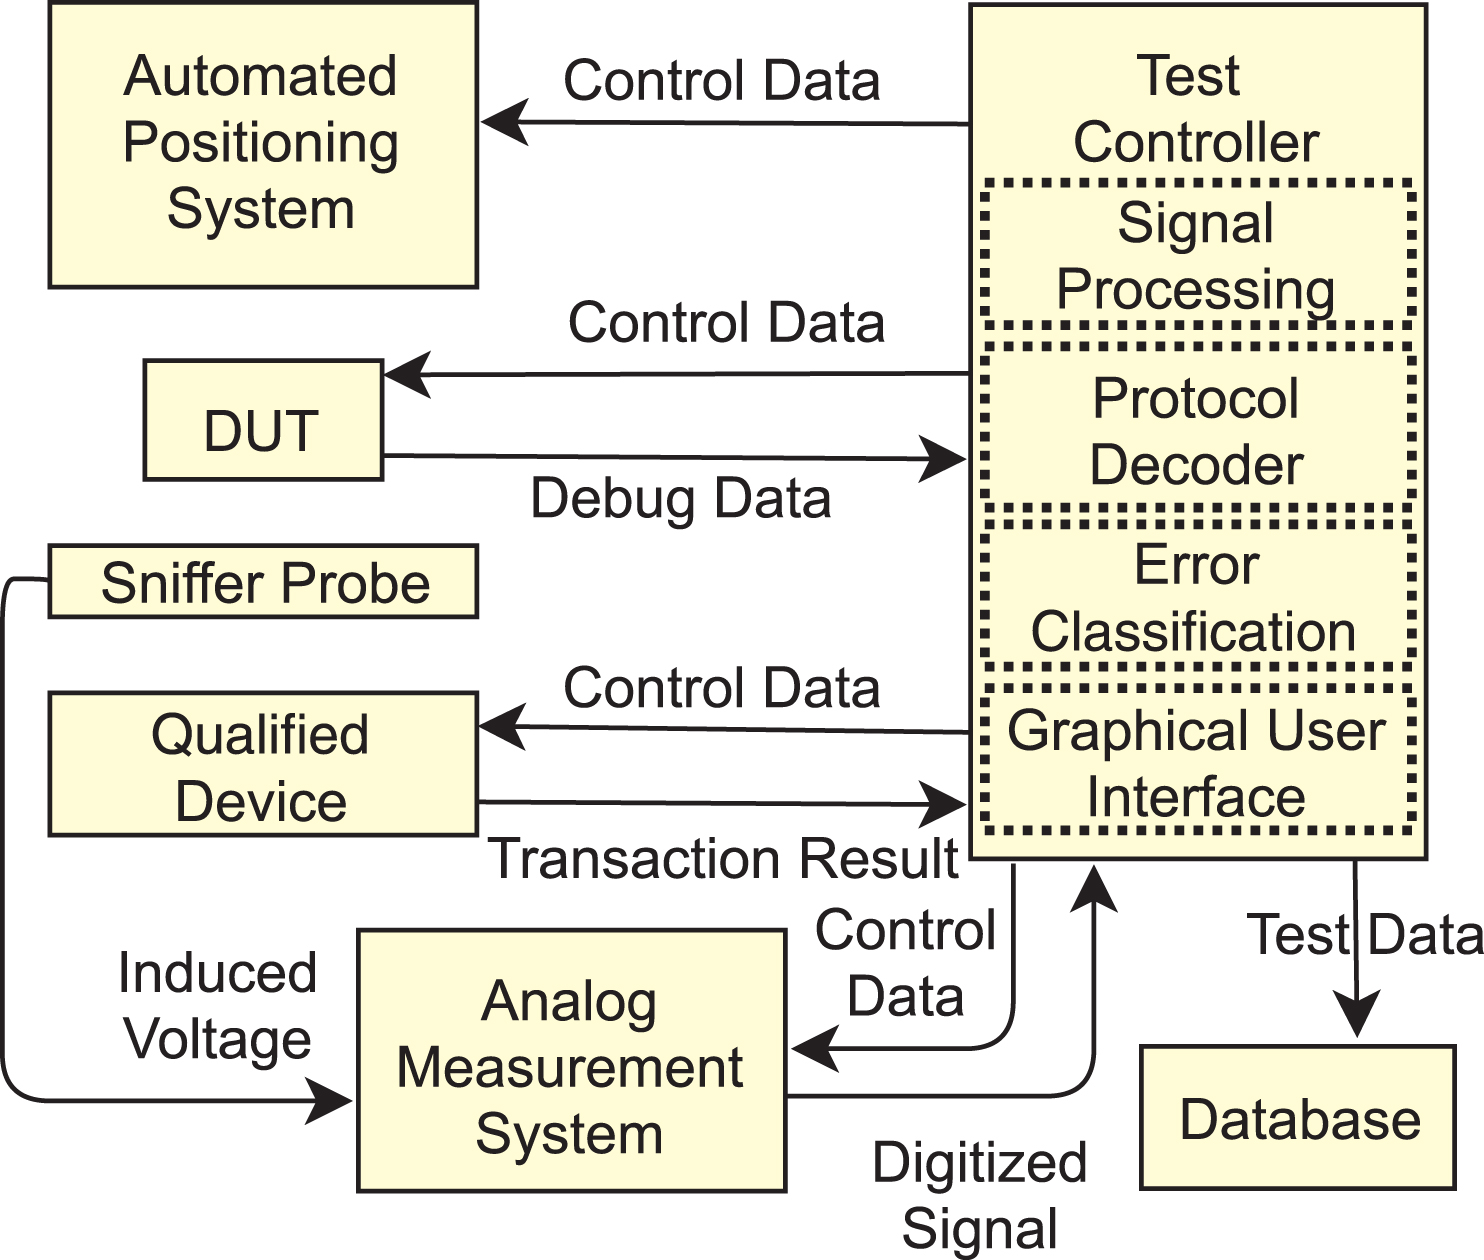 New automated interoperability test and debug system architecture.